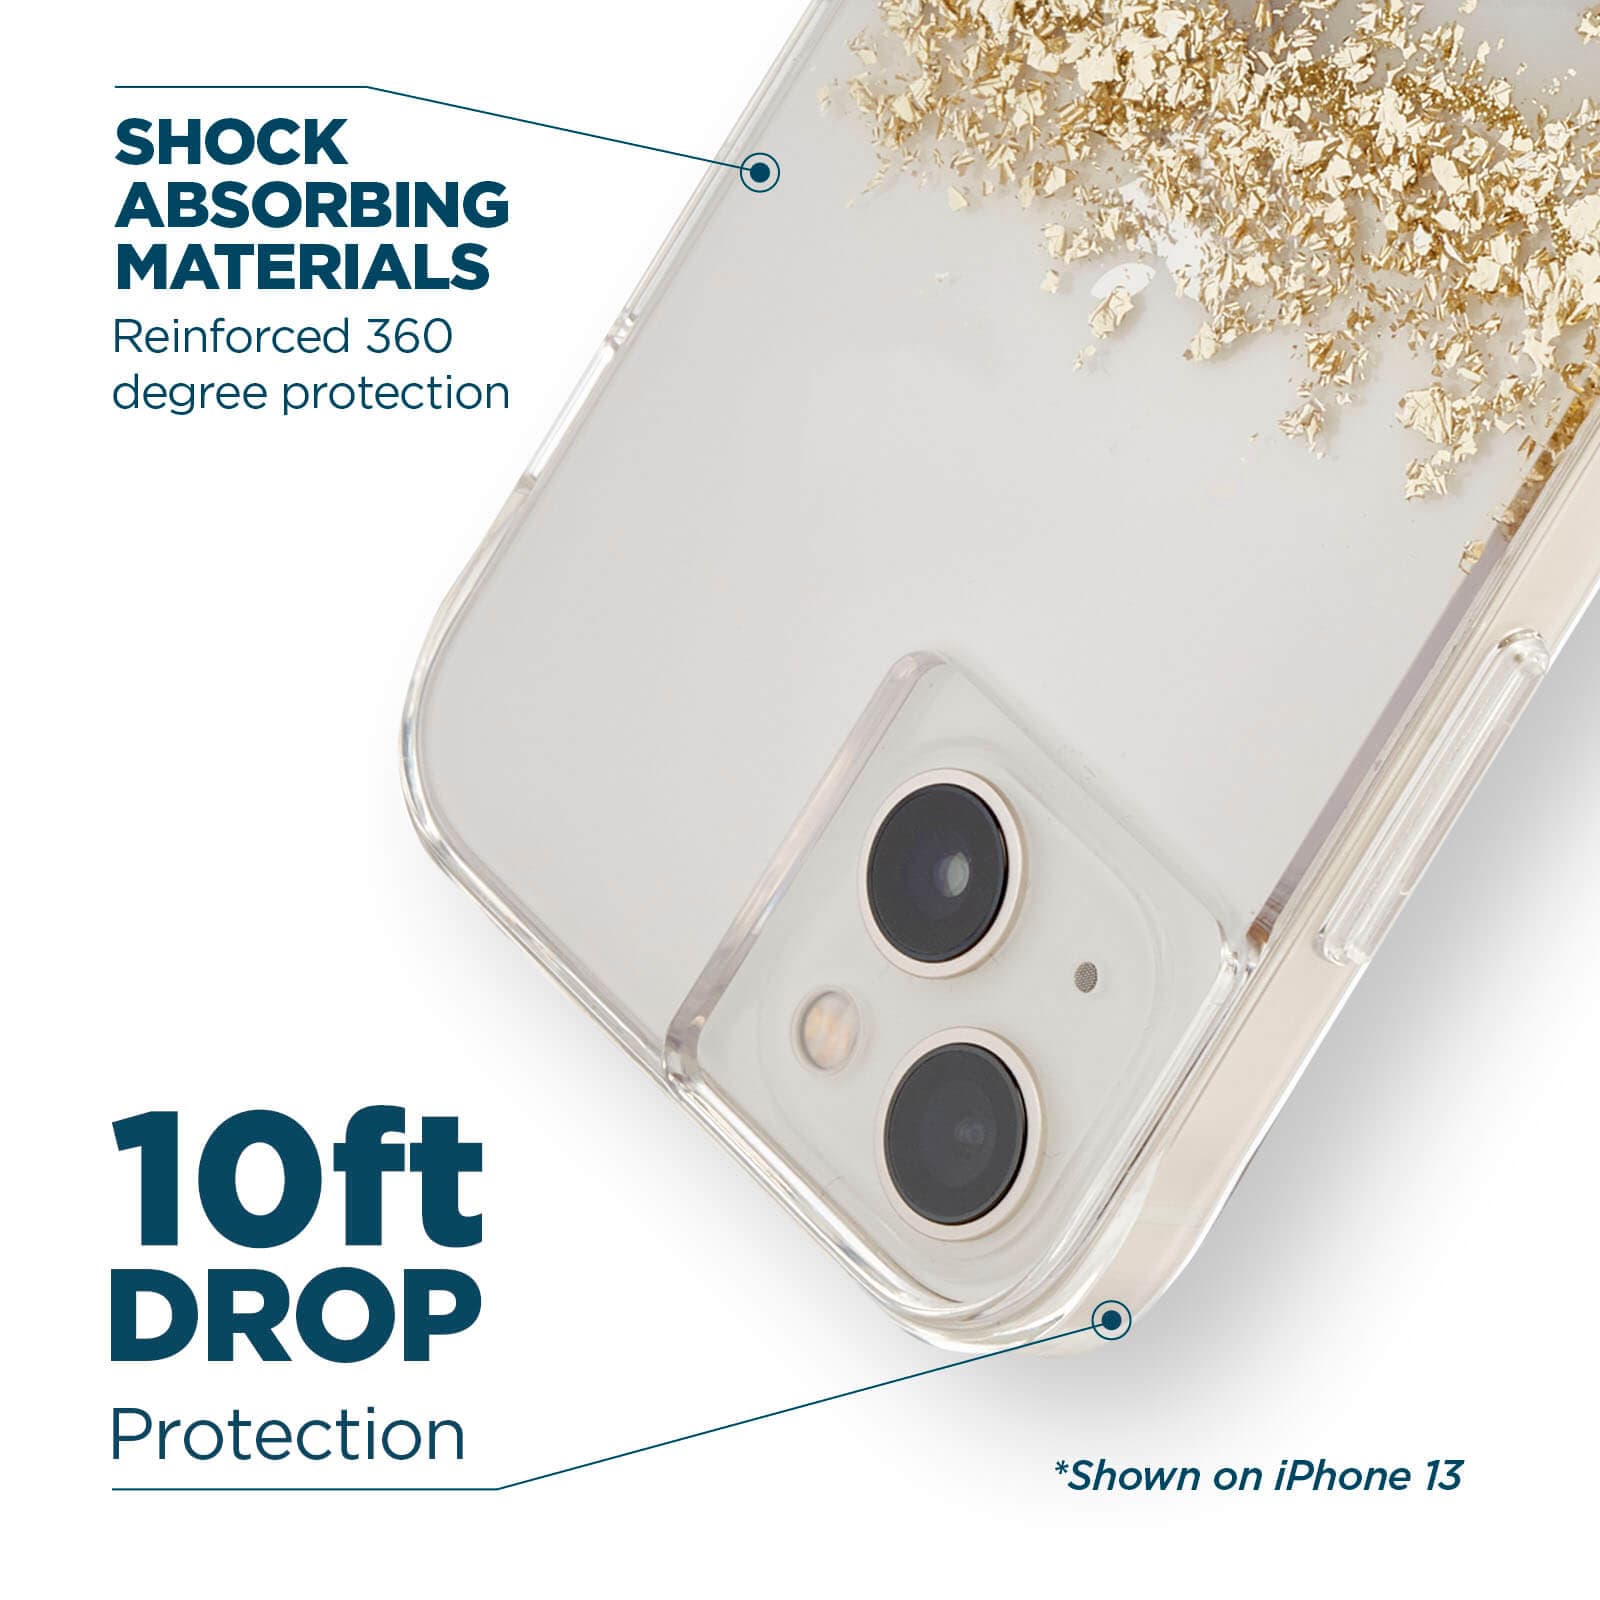 Shock absorbing materials reinforced 360 degree protection. 10ft drop protection. shown on iPhone 13. color::Karat Marble